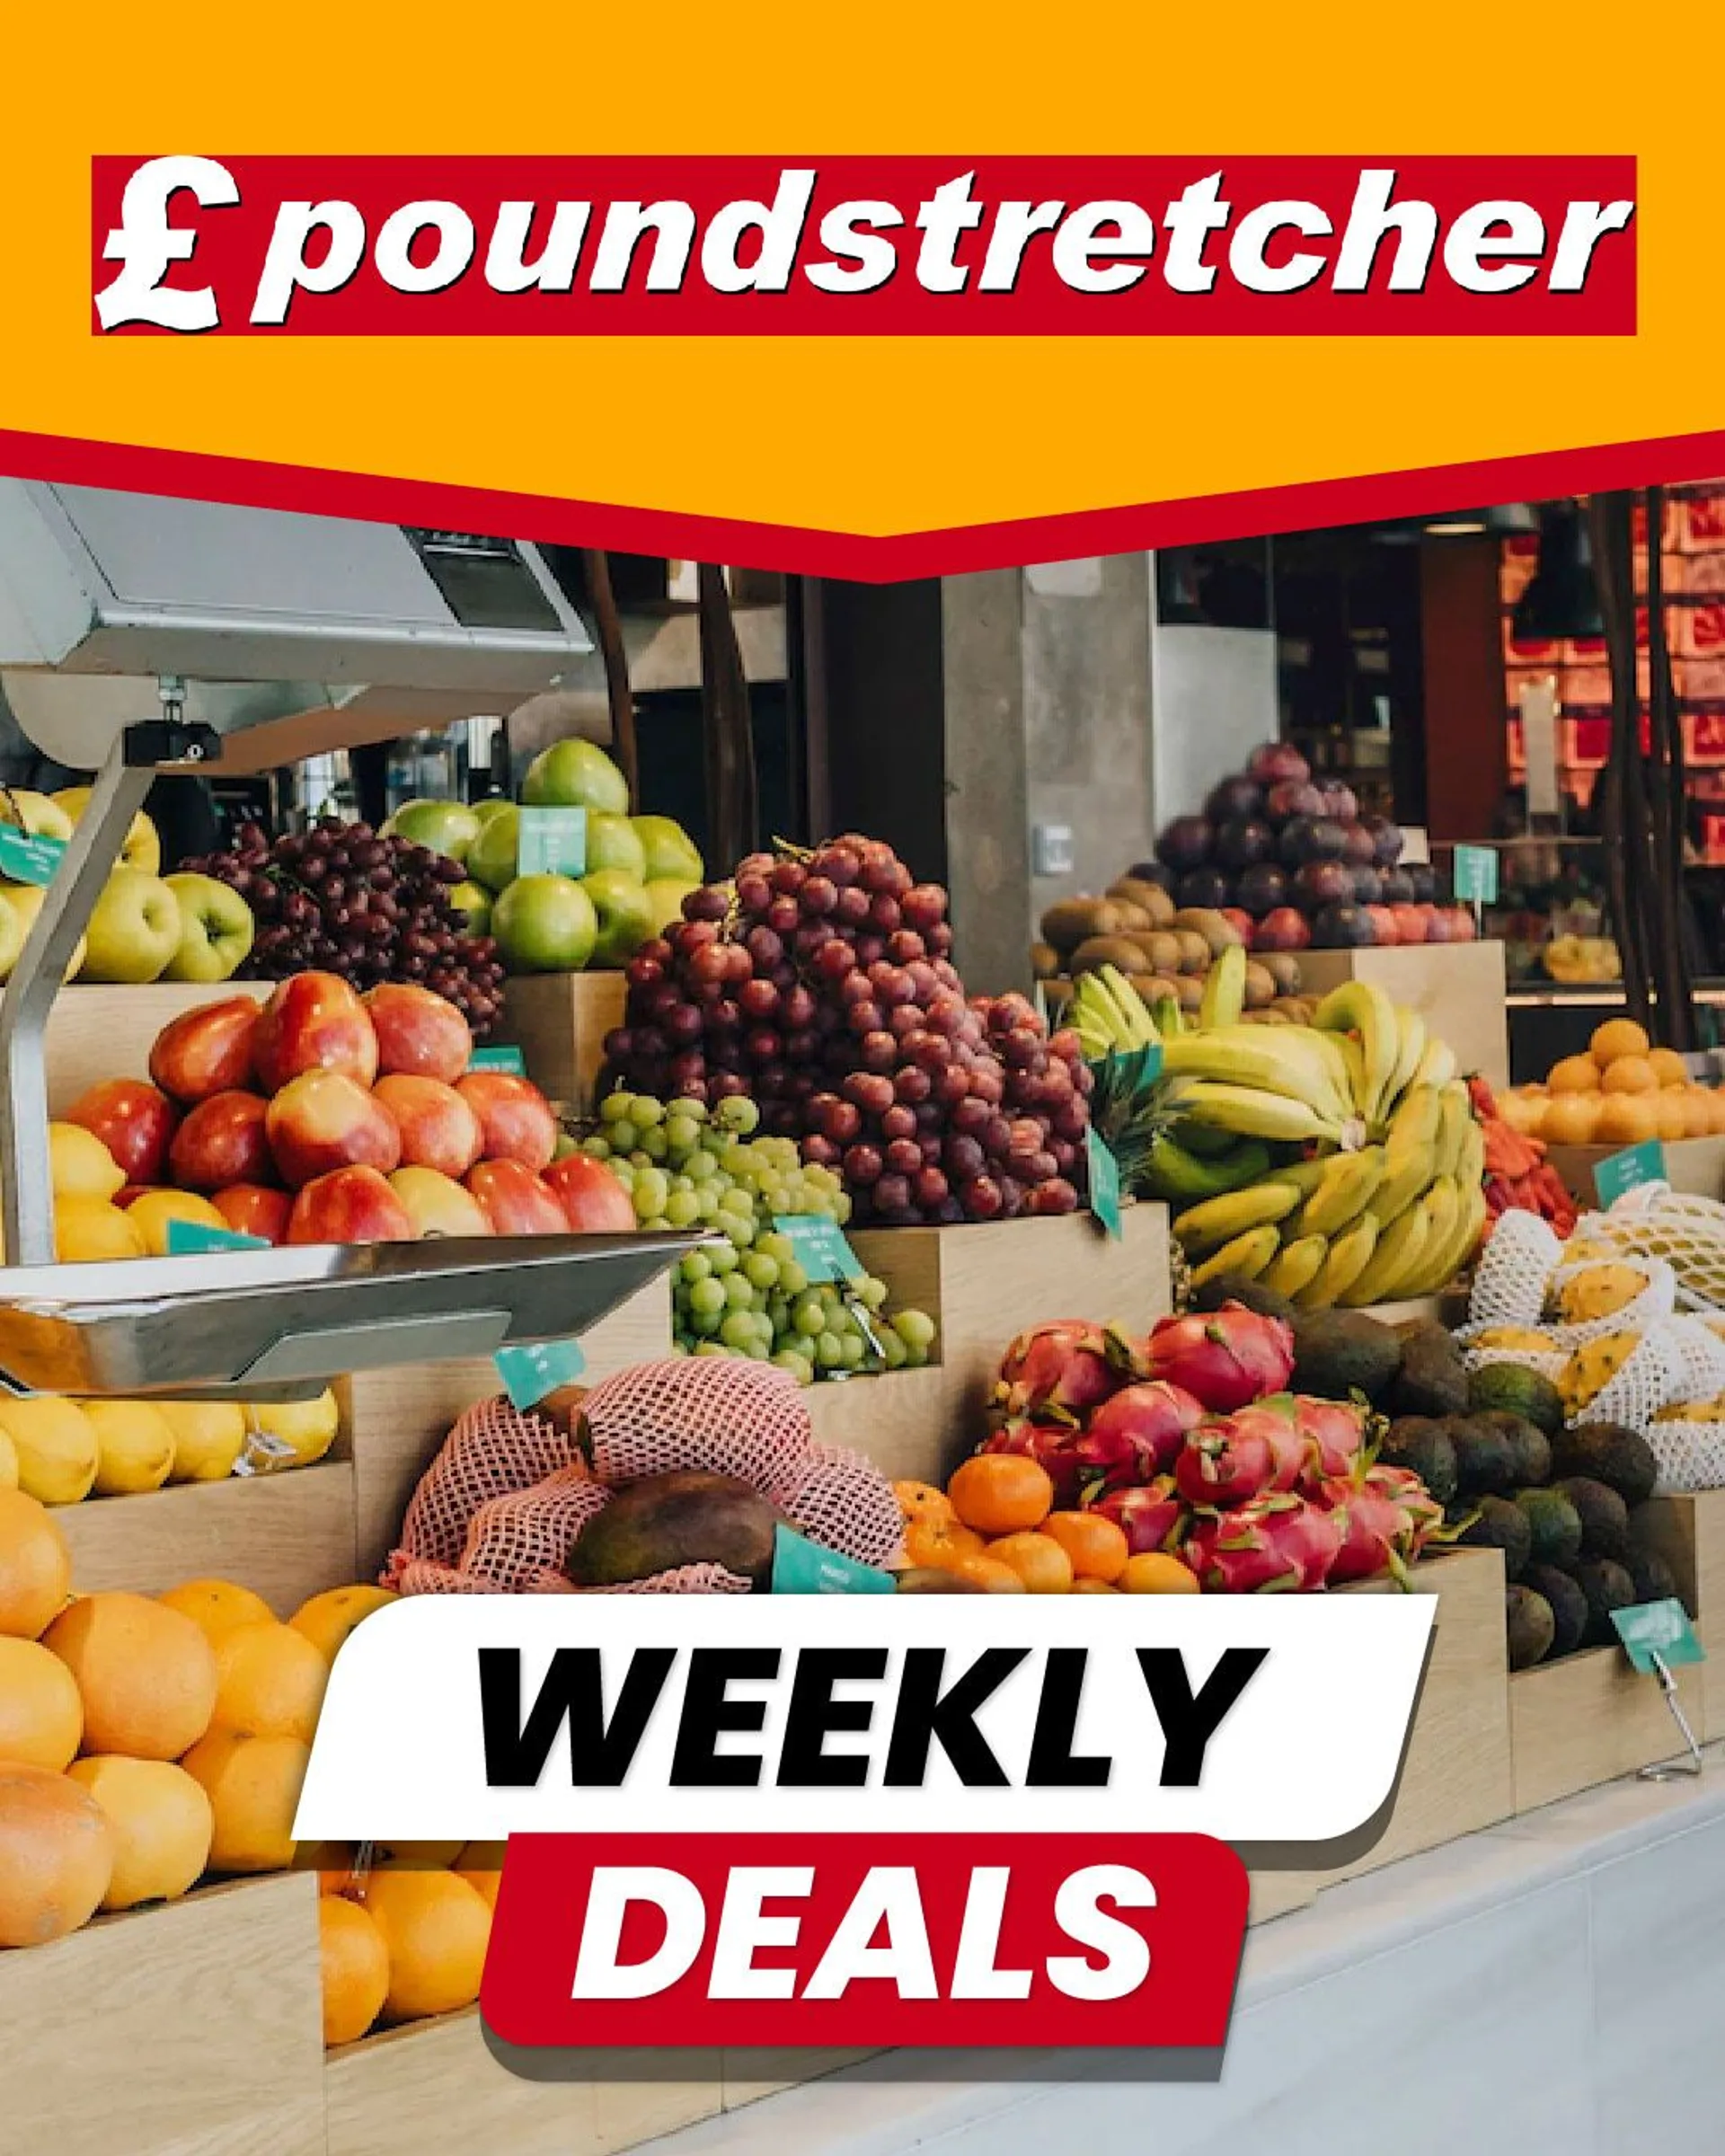 Poundstretcher - Food, Drinks and Essentials